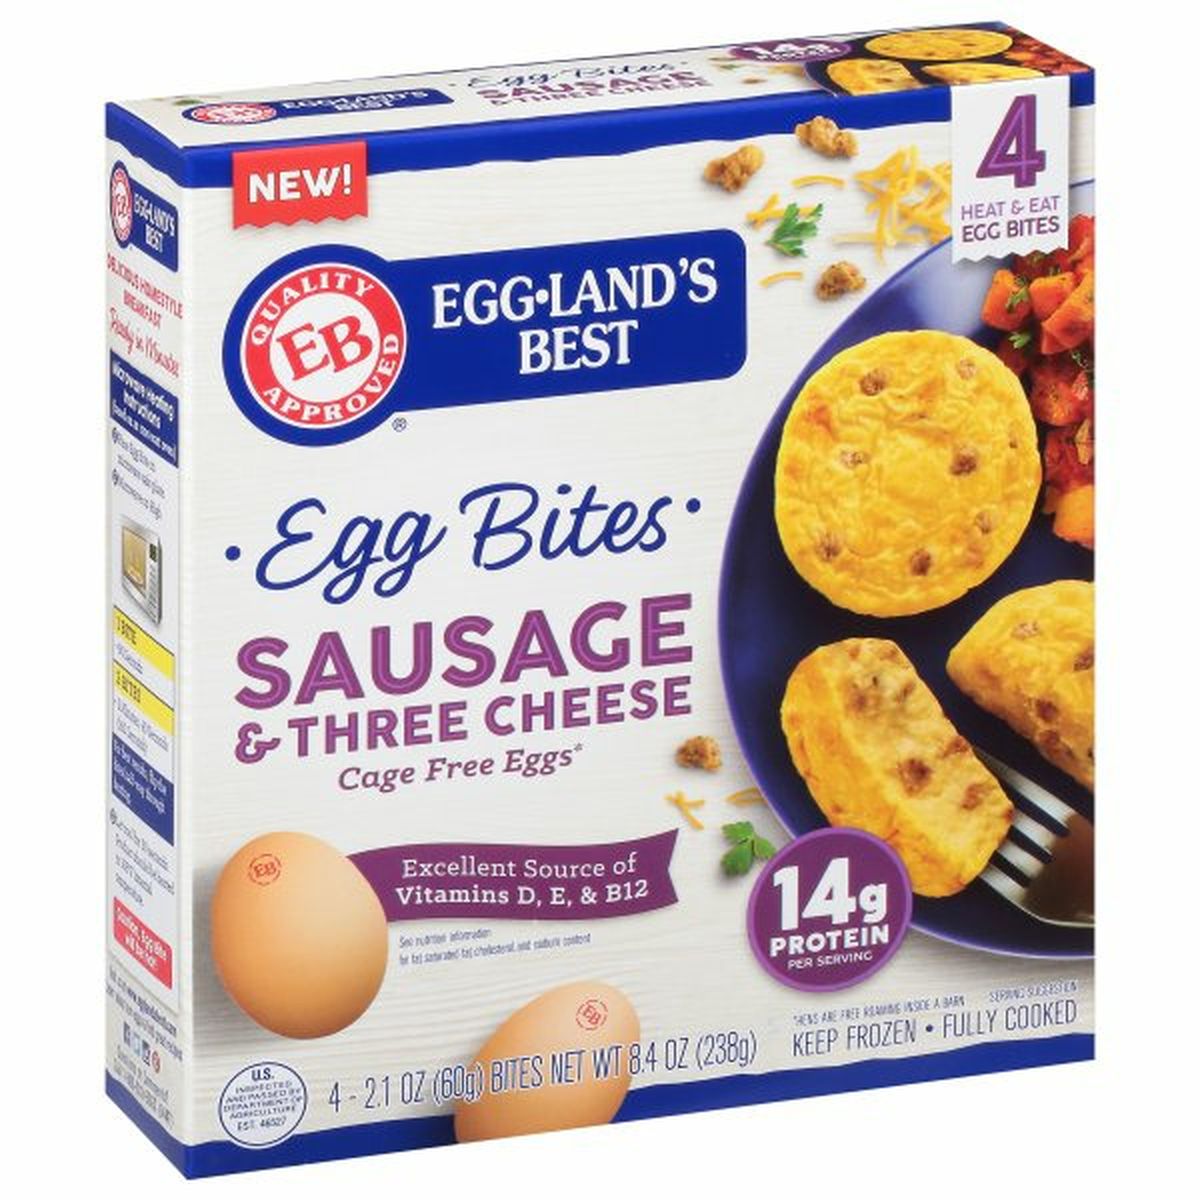 Calories in Eggland's Best Egg Bites, Sausage & Three Cheese